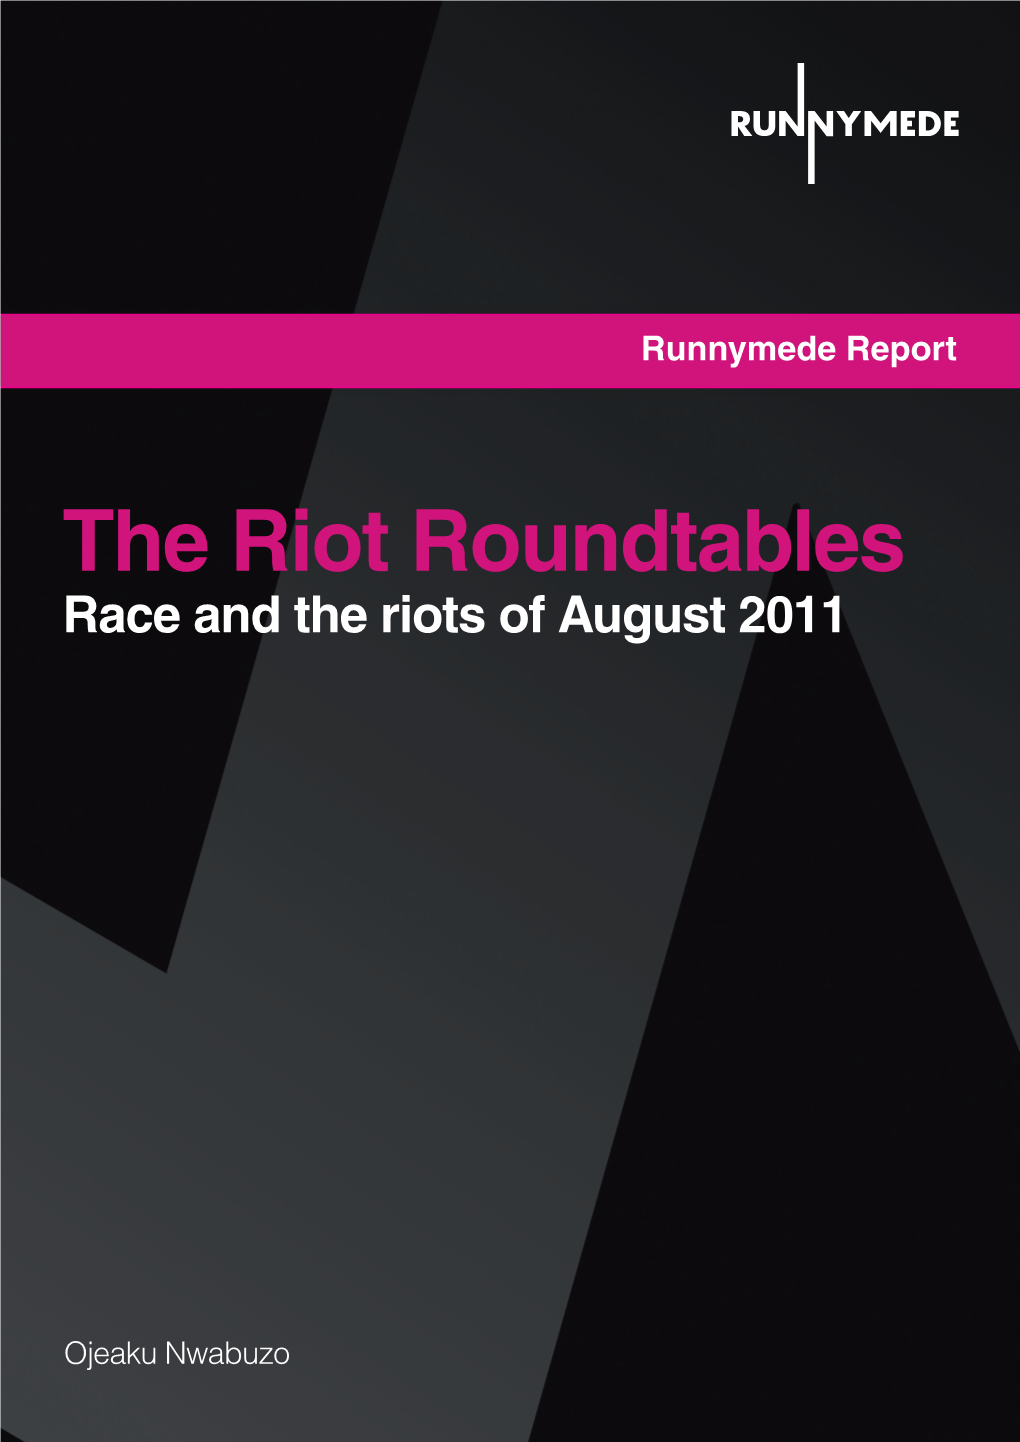 The Riot Roundtables Race and the Riots of August 2011